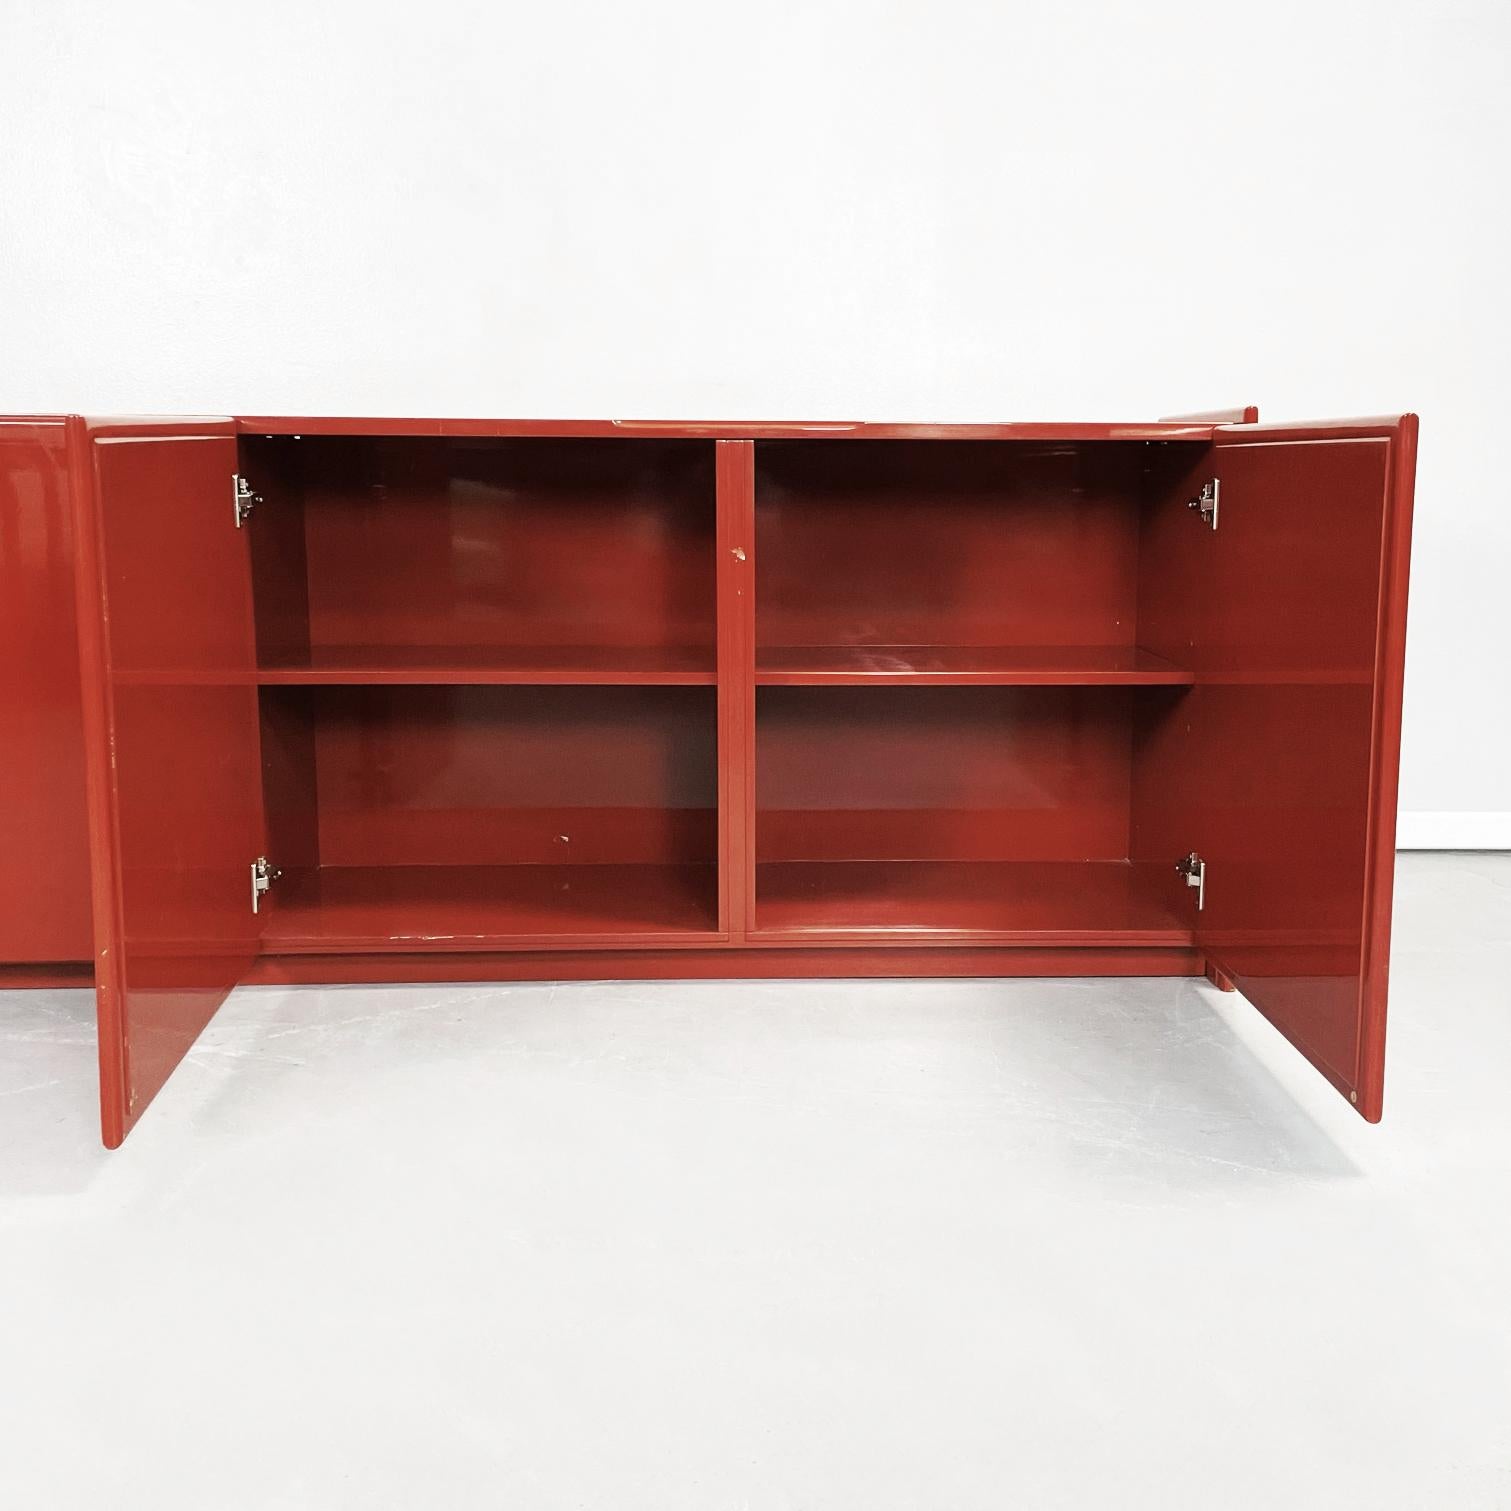 Italian Mid-Century Modern Rectangular Red Lacquered Solid Wood Sideboard, 1980s For Sale 2